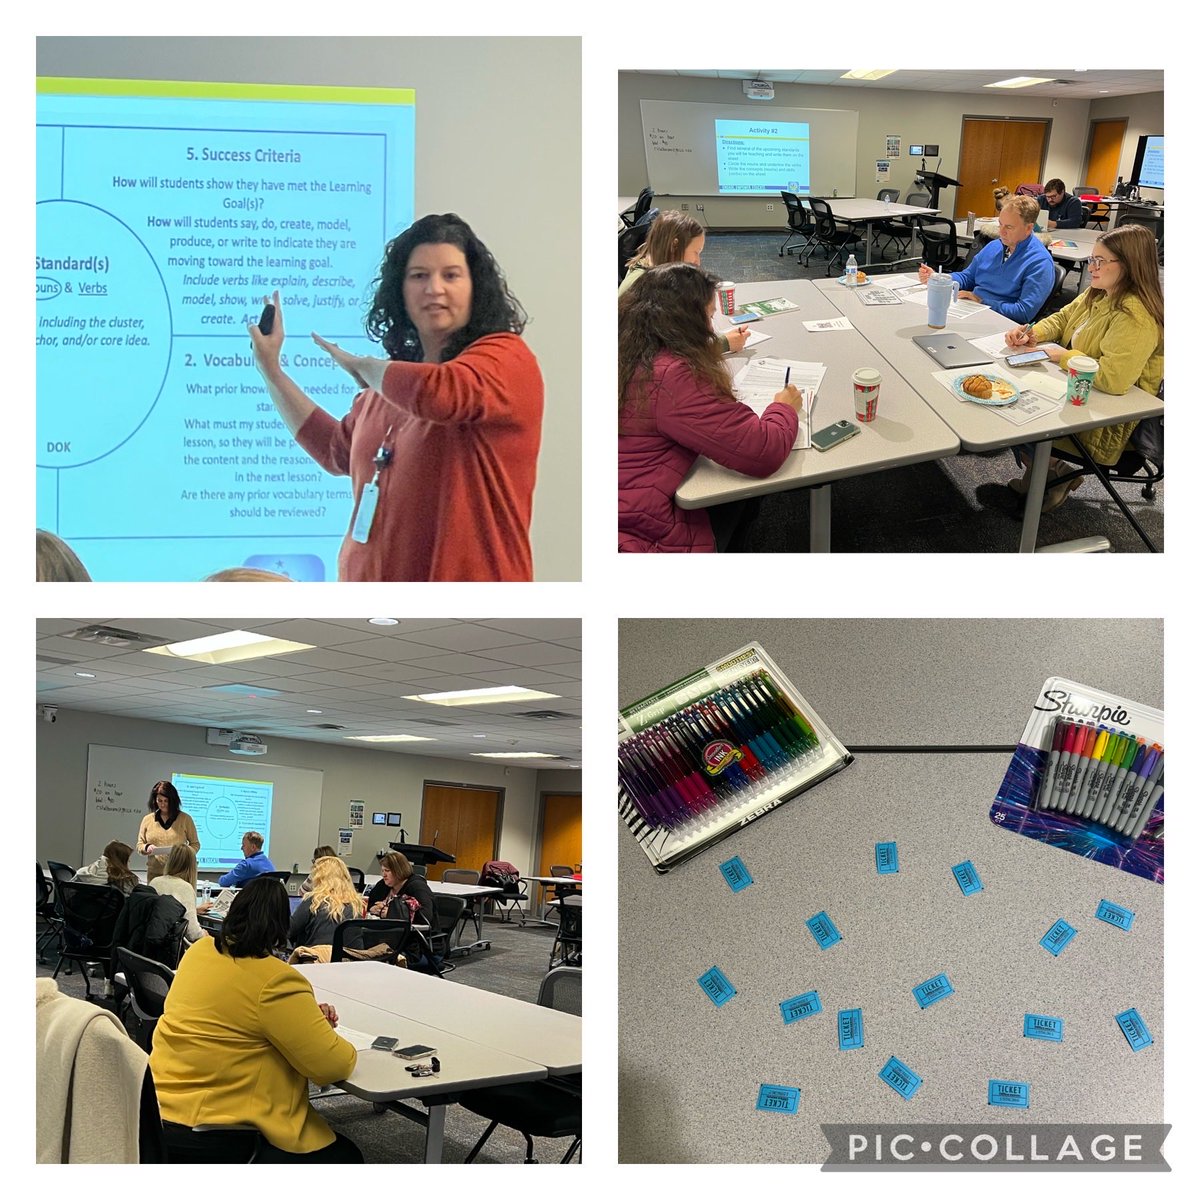 It’s a great morning to be an MCCSC educator! Lori Ihle provided an engaging morning of analyzing the Indiana Academic Standards & curricular resources. #NTWPLC #MCCSC